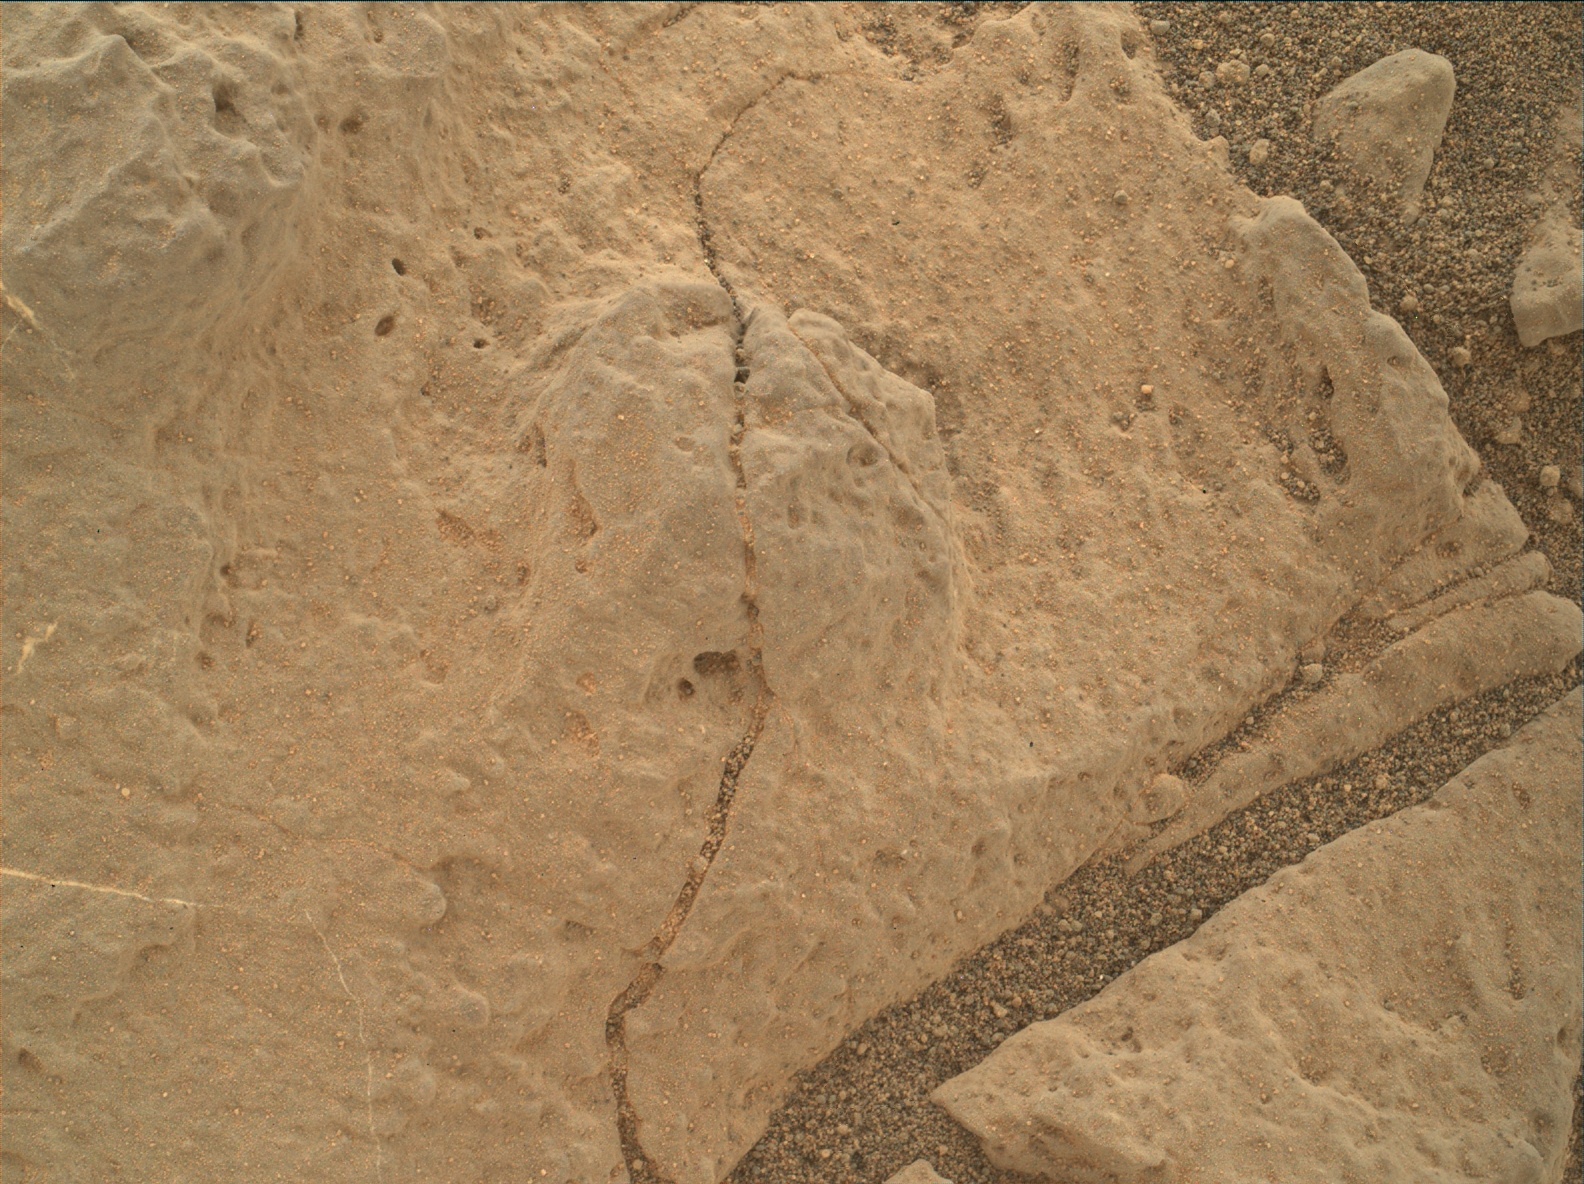 Nasa's Mars rover Curiosity acquired this image using its Mars Hand Lens Imager (MAHLI) on Sol 1191